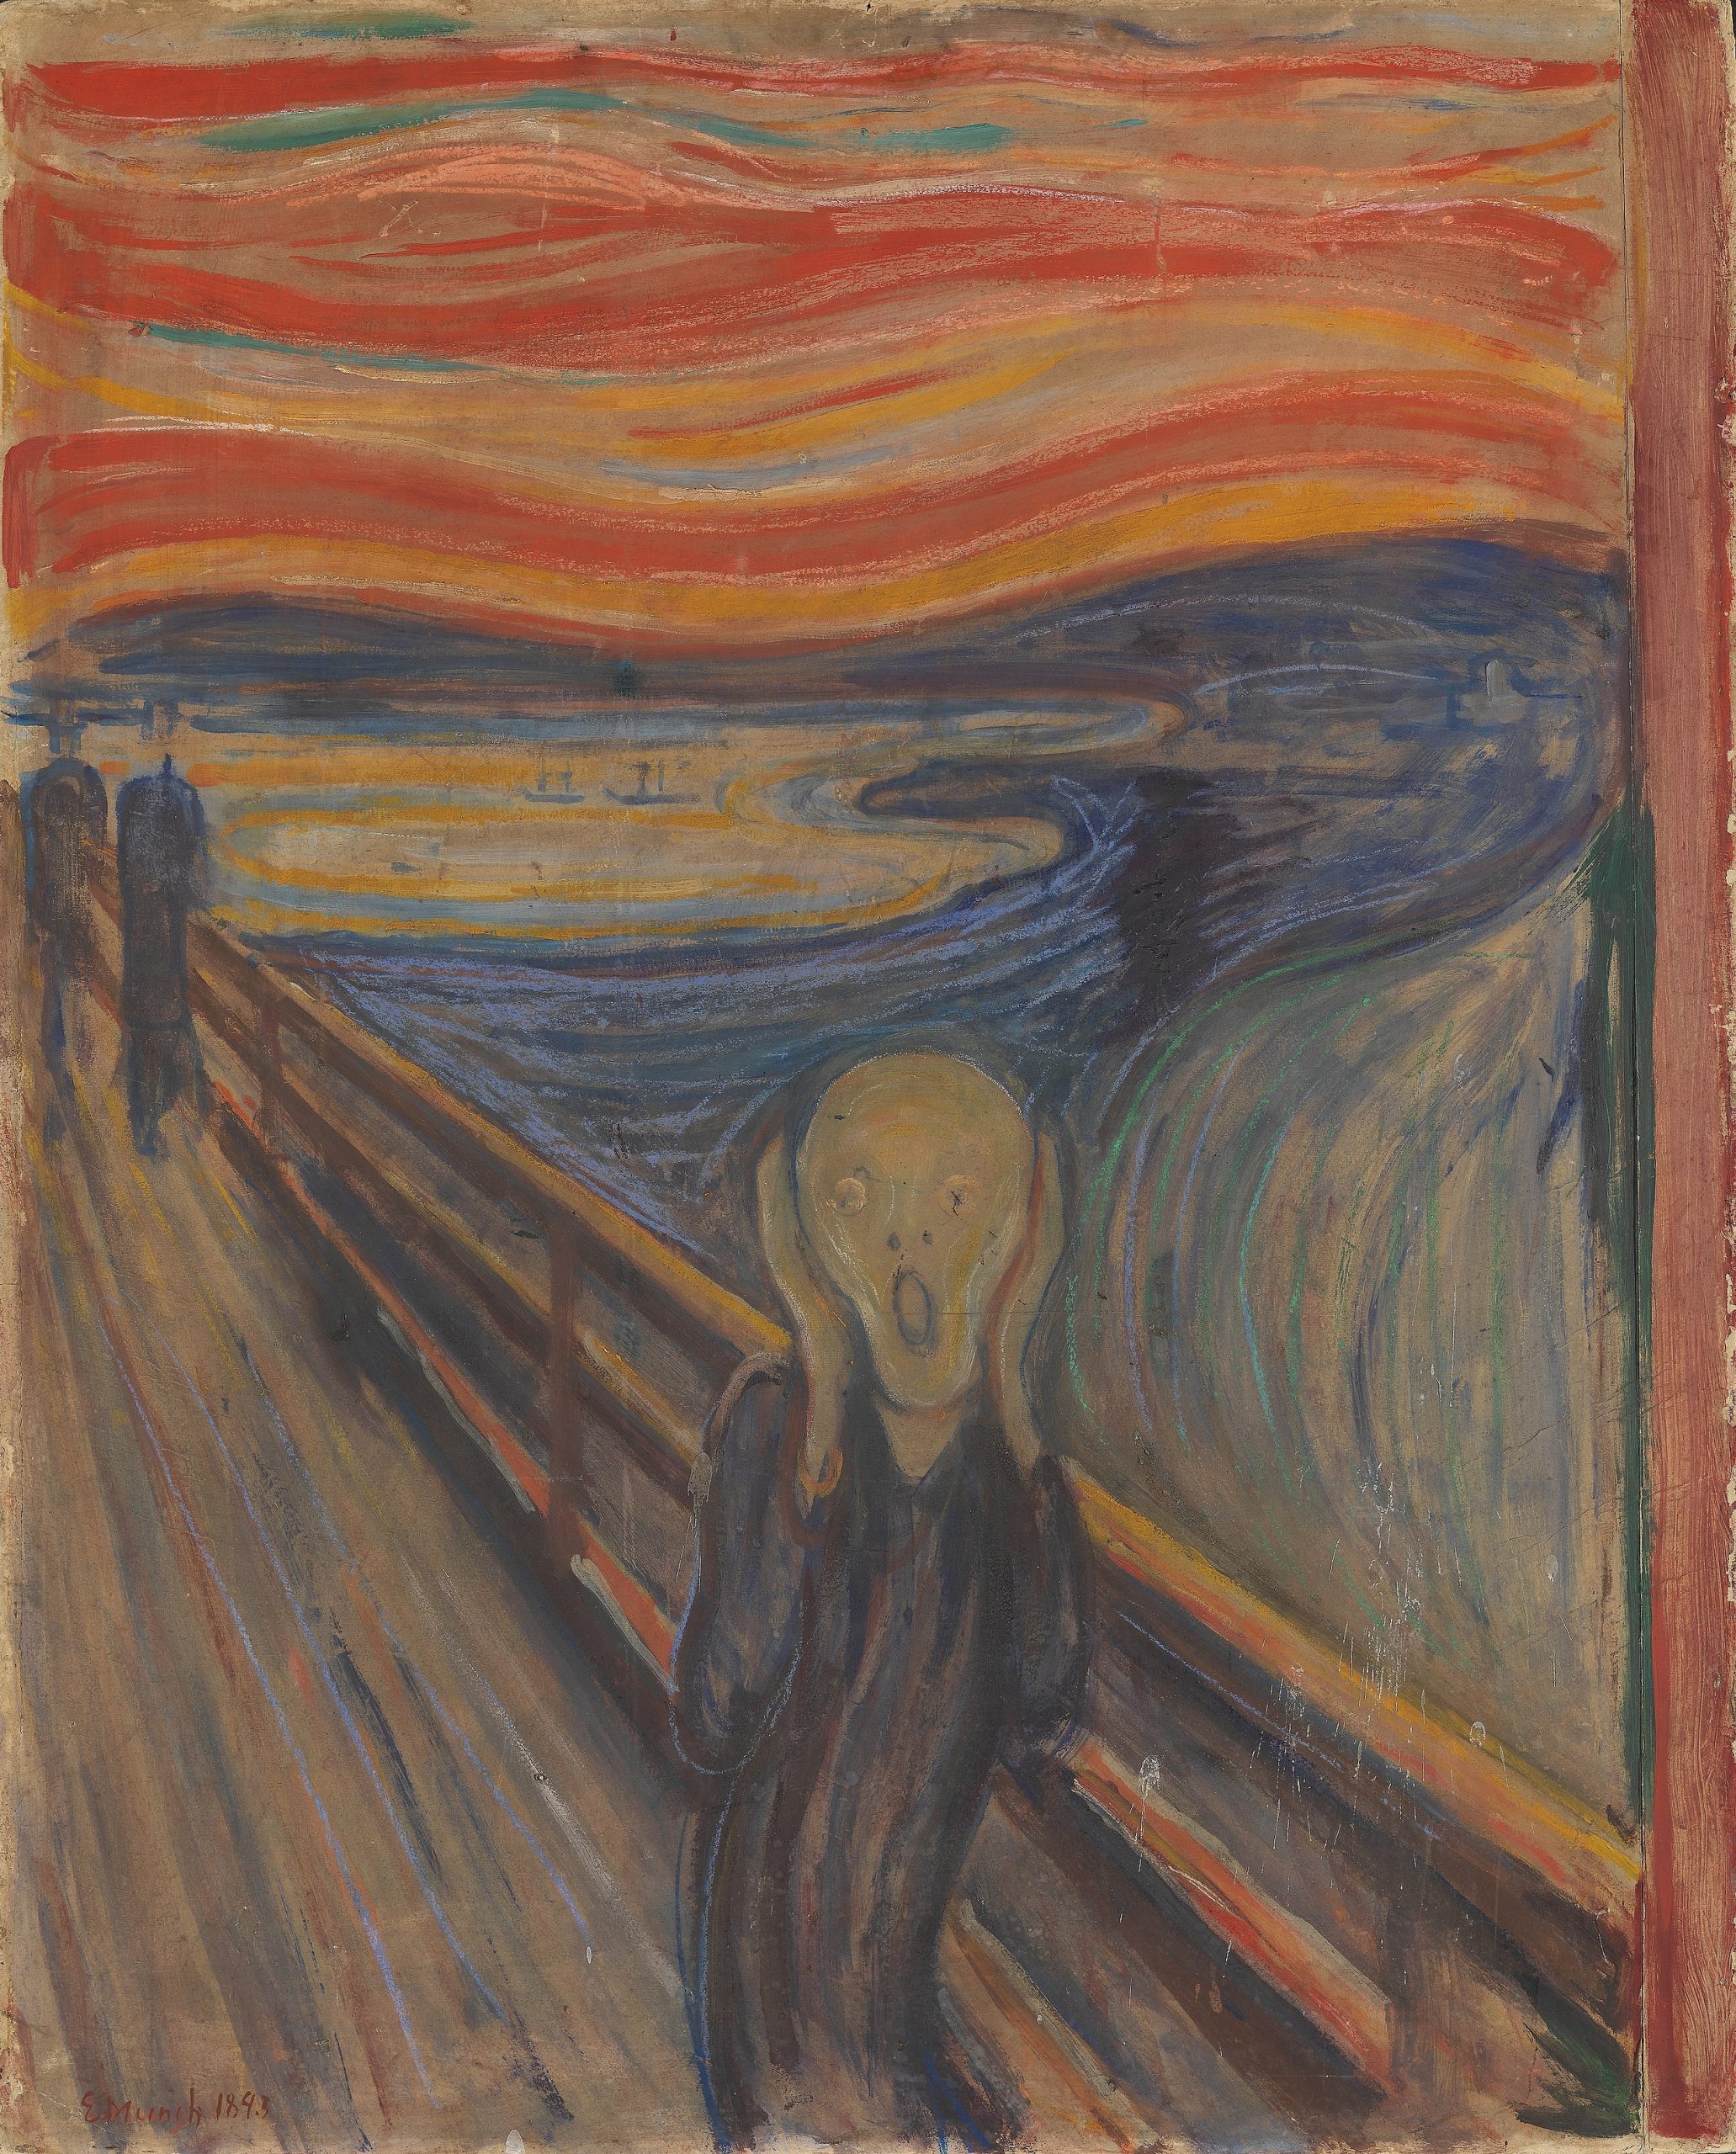 2560px-Edvard_Munch_1893_The_Scream_oil_tempera_and_pastel_on_cardboard_91_x_73_cm_National_Gallery_of_Norway-scaled.jpg